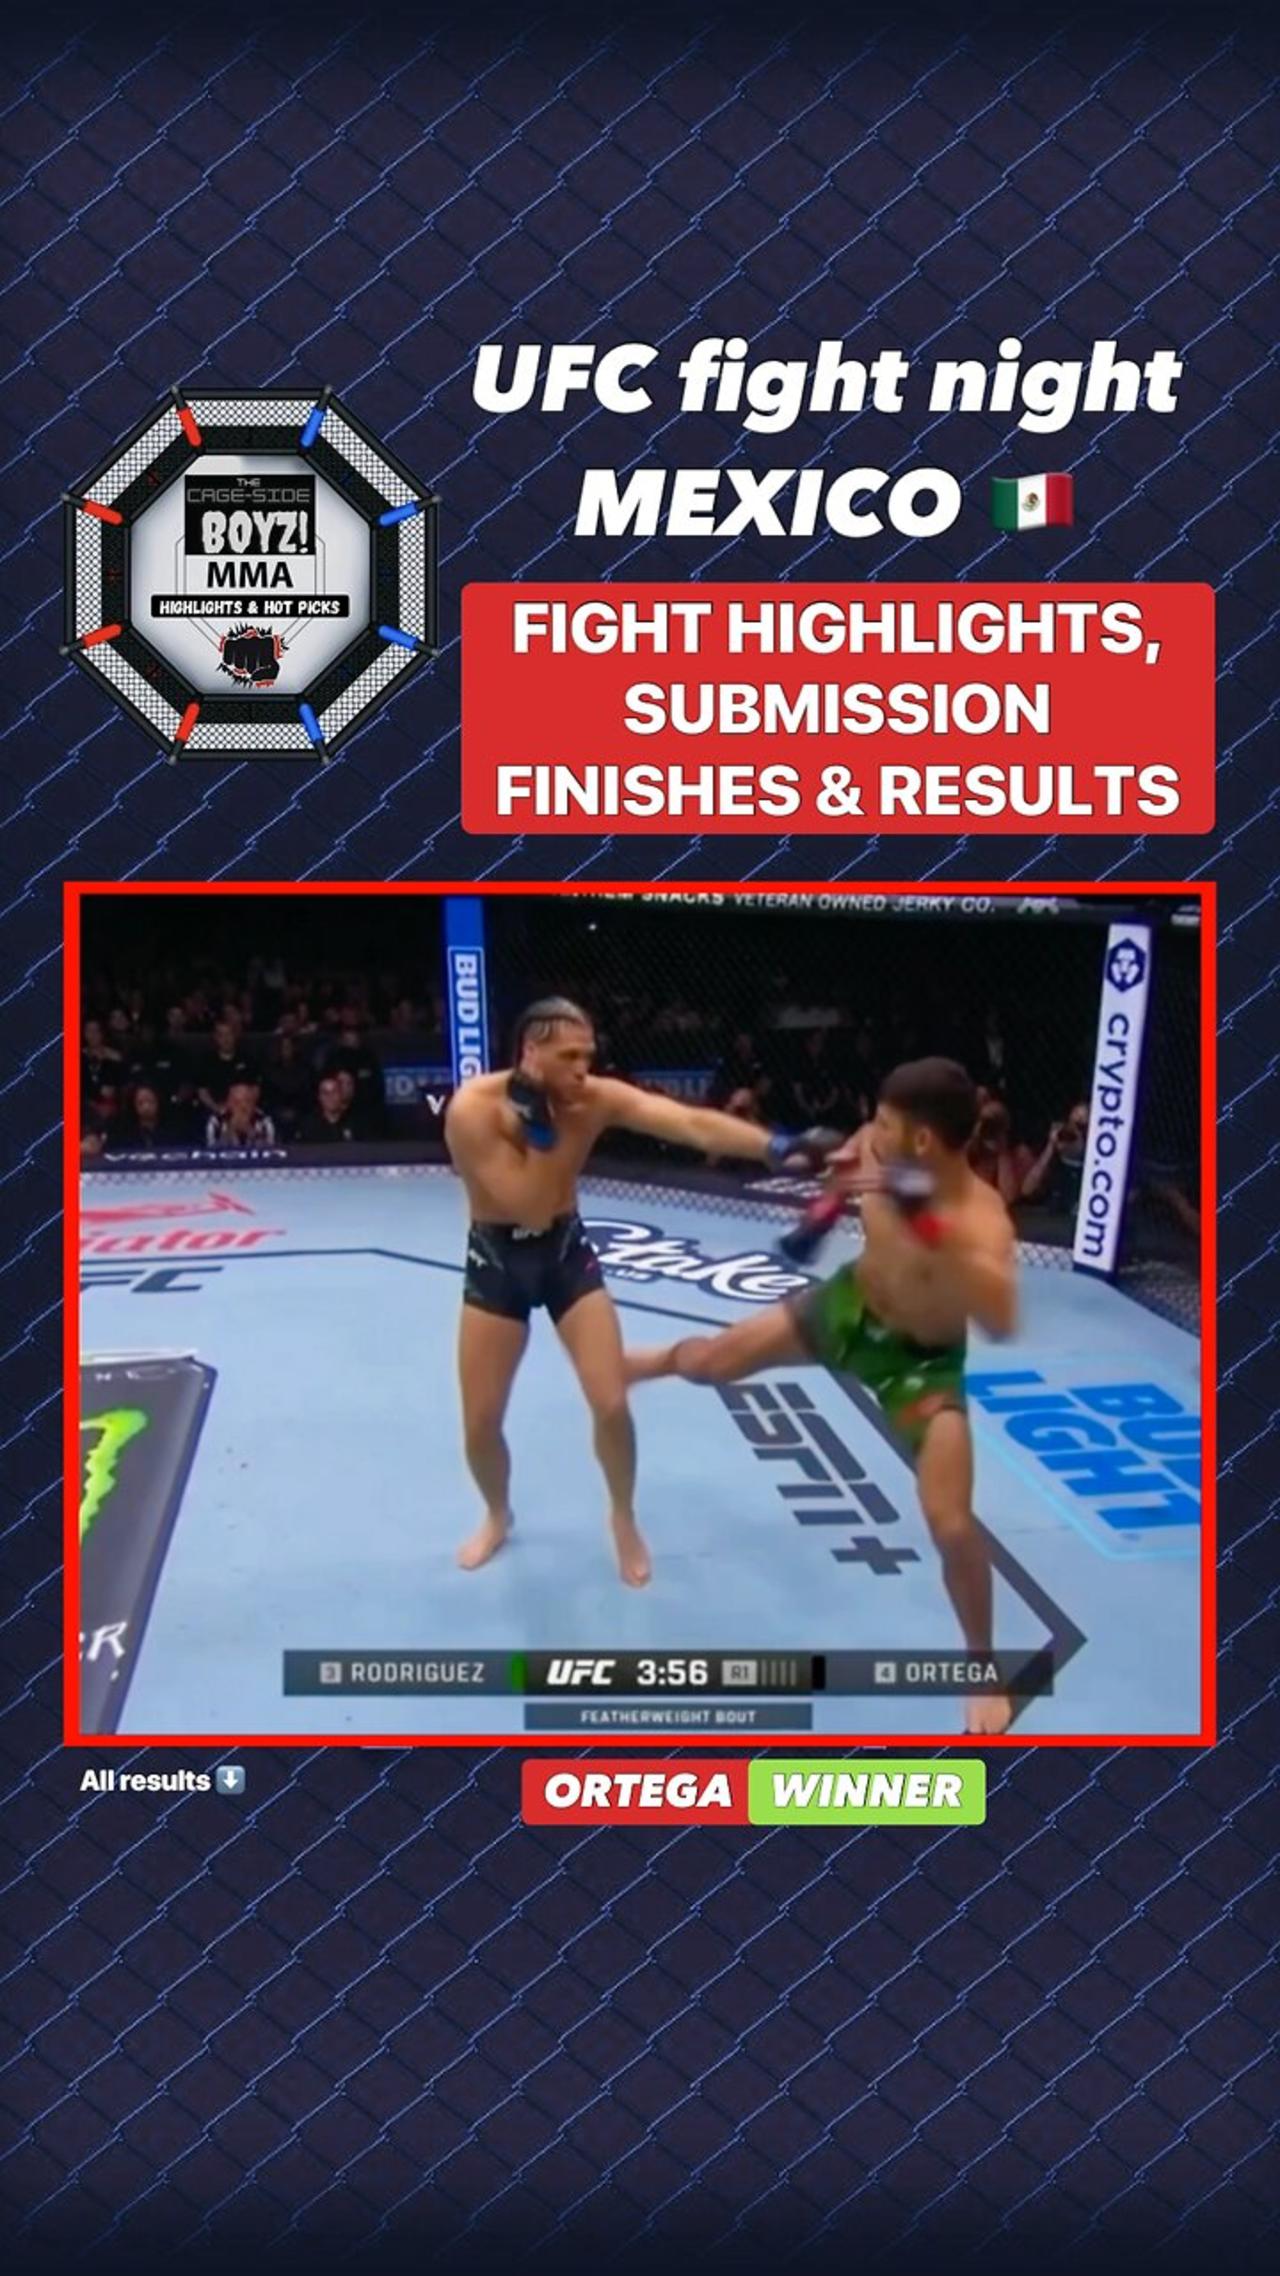 UFC fight night - MEXICO - fight HIGHLIGHTS, finishes & RESULTS.